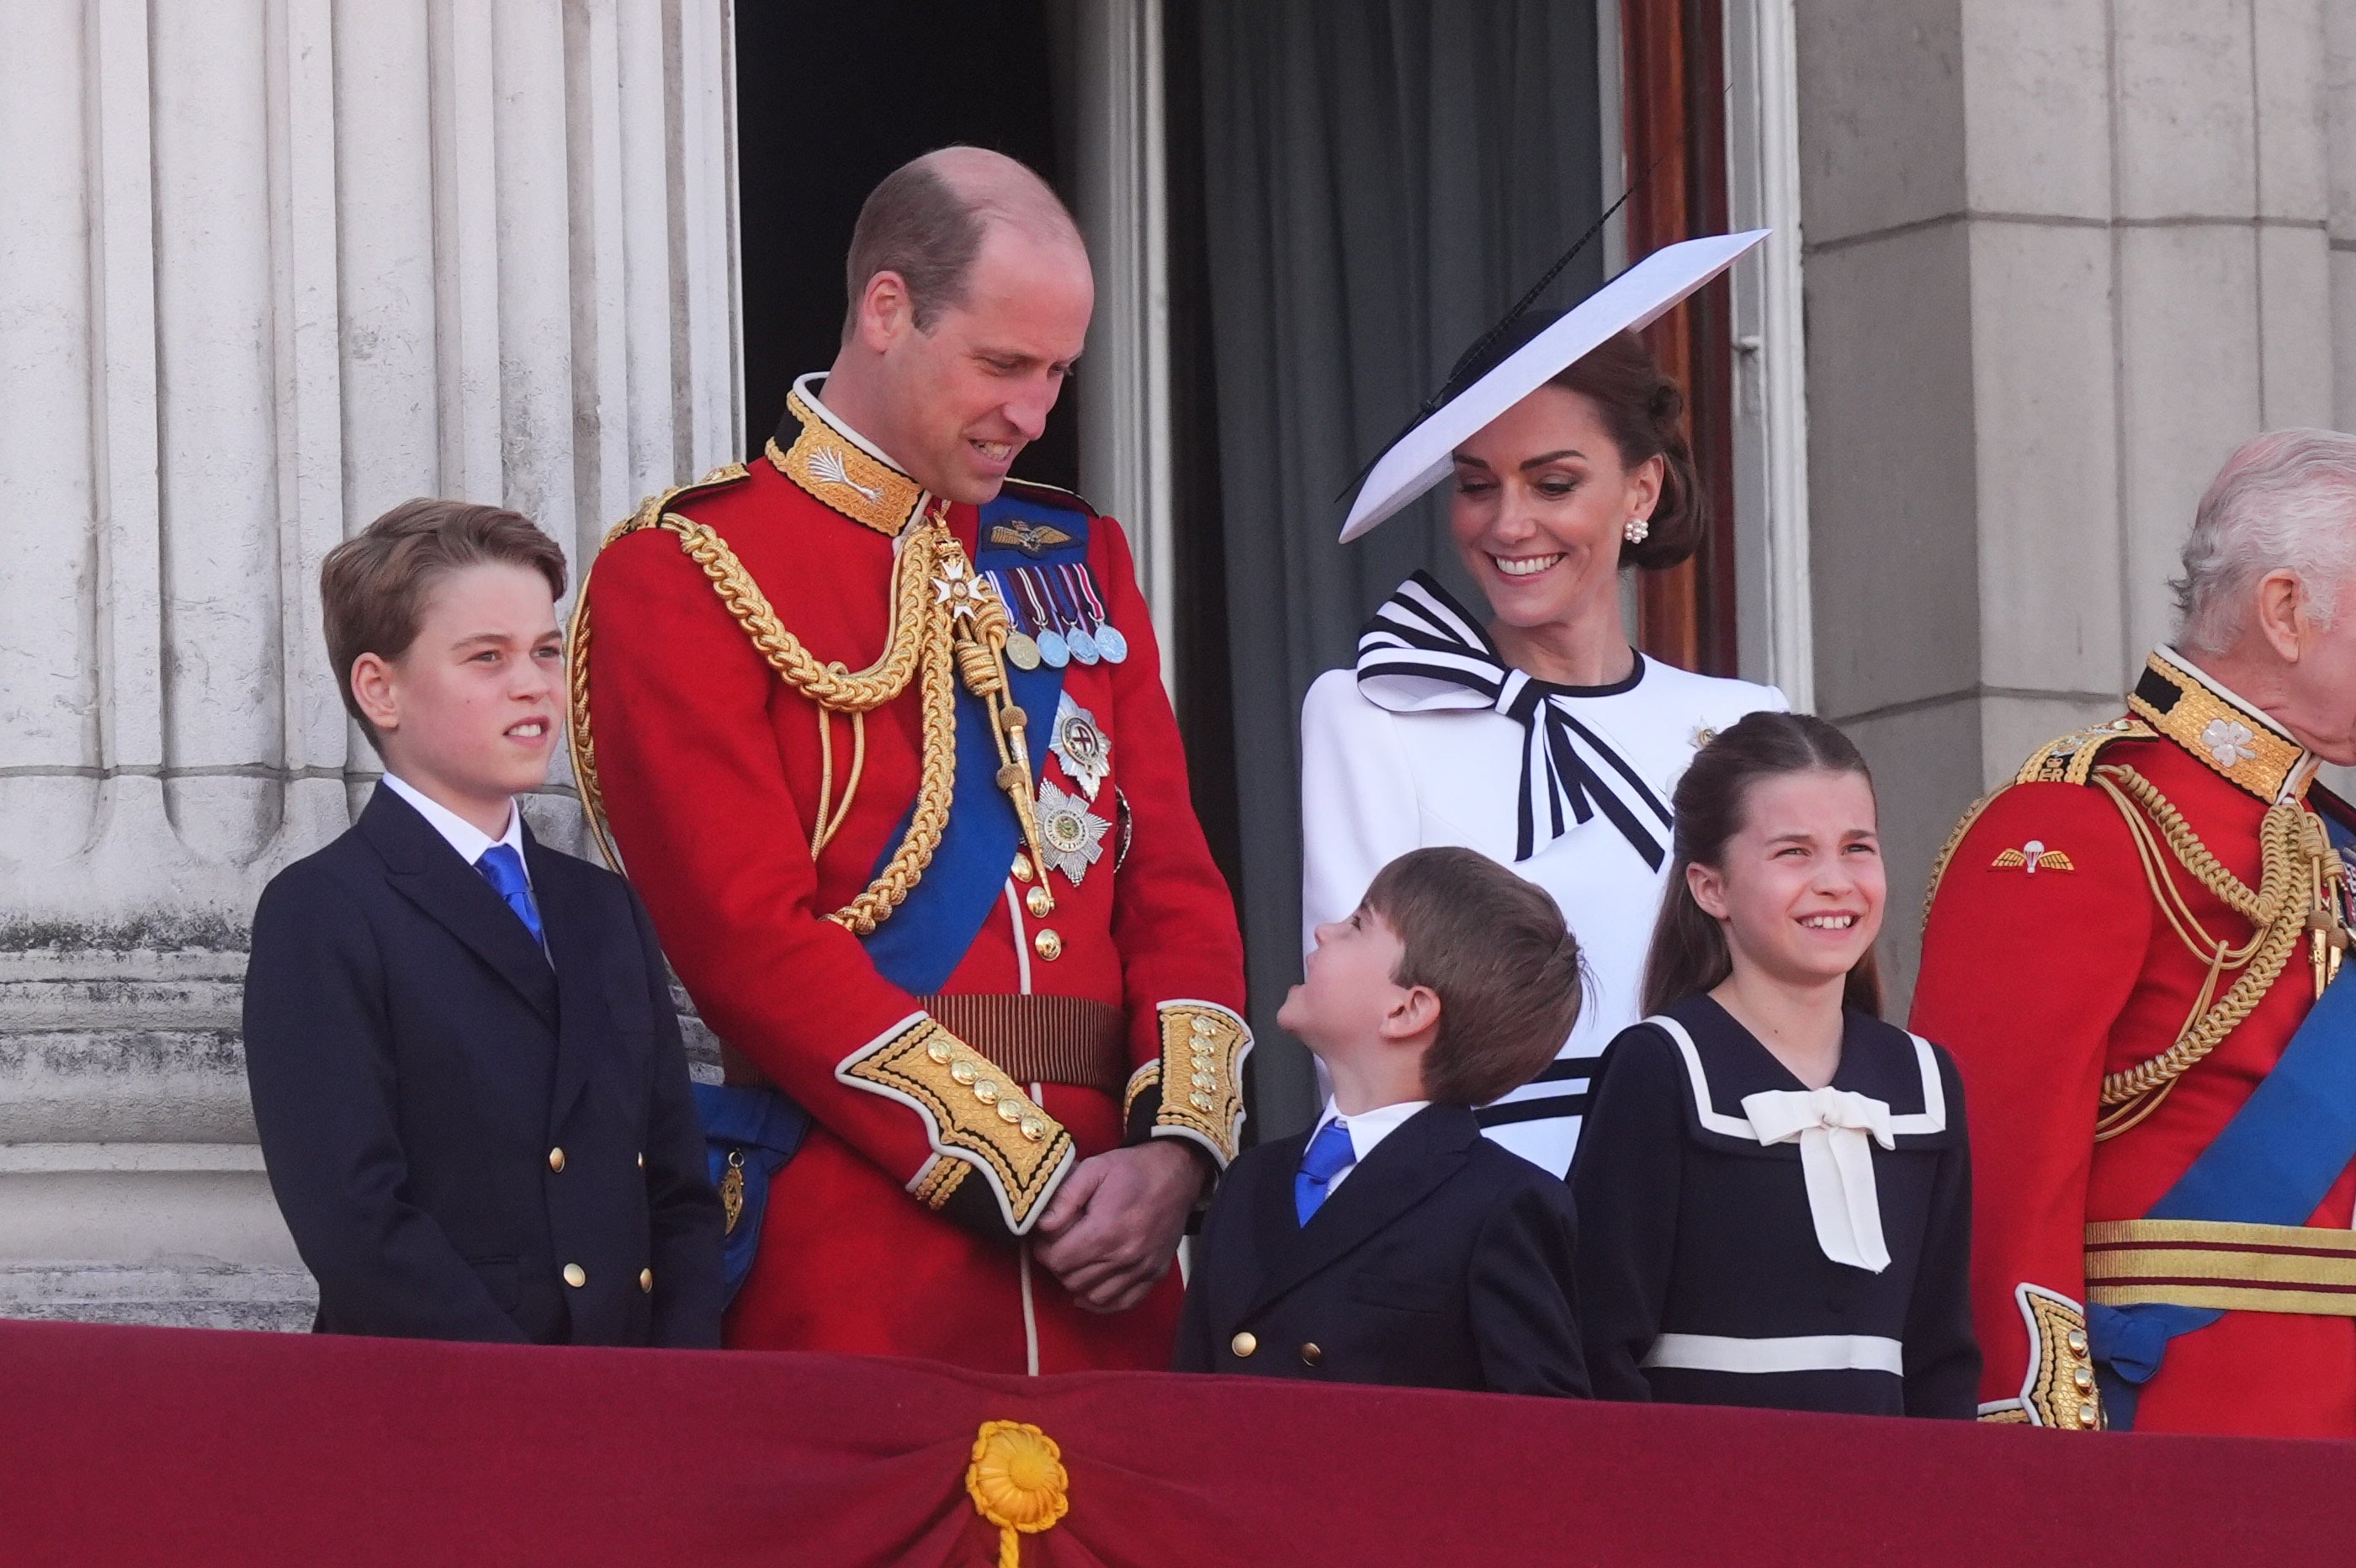 Kate and William enjoyed a family day with their children on the balcony